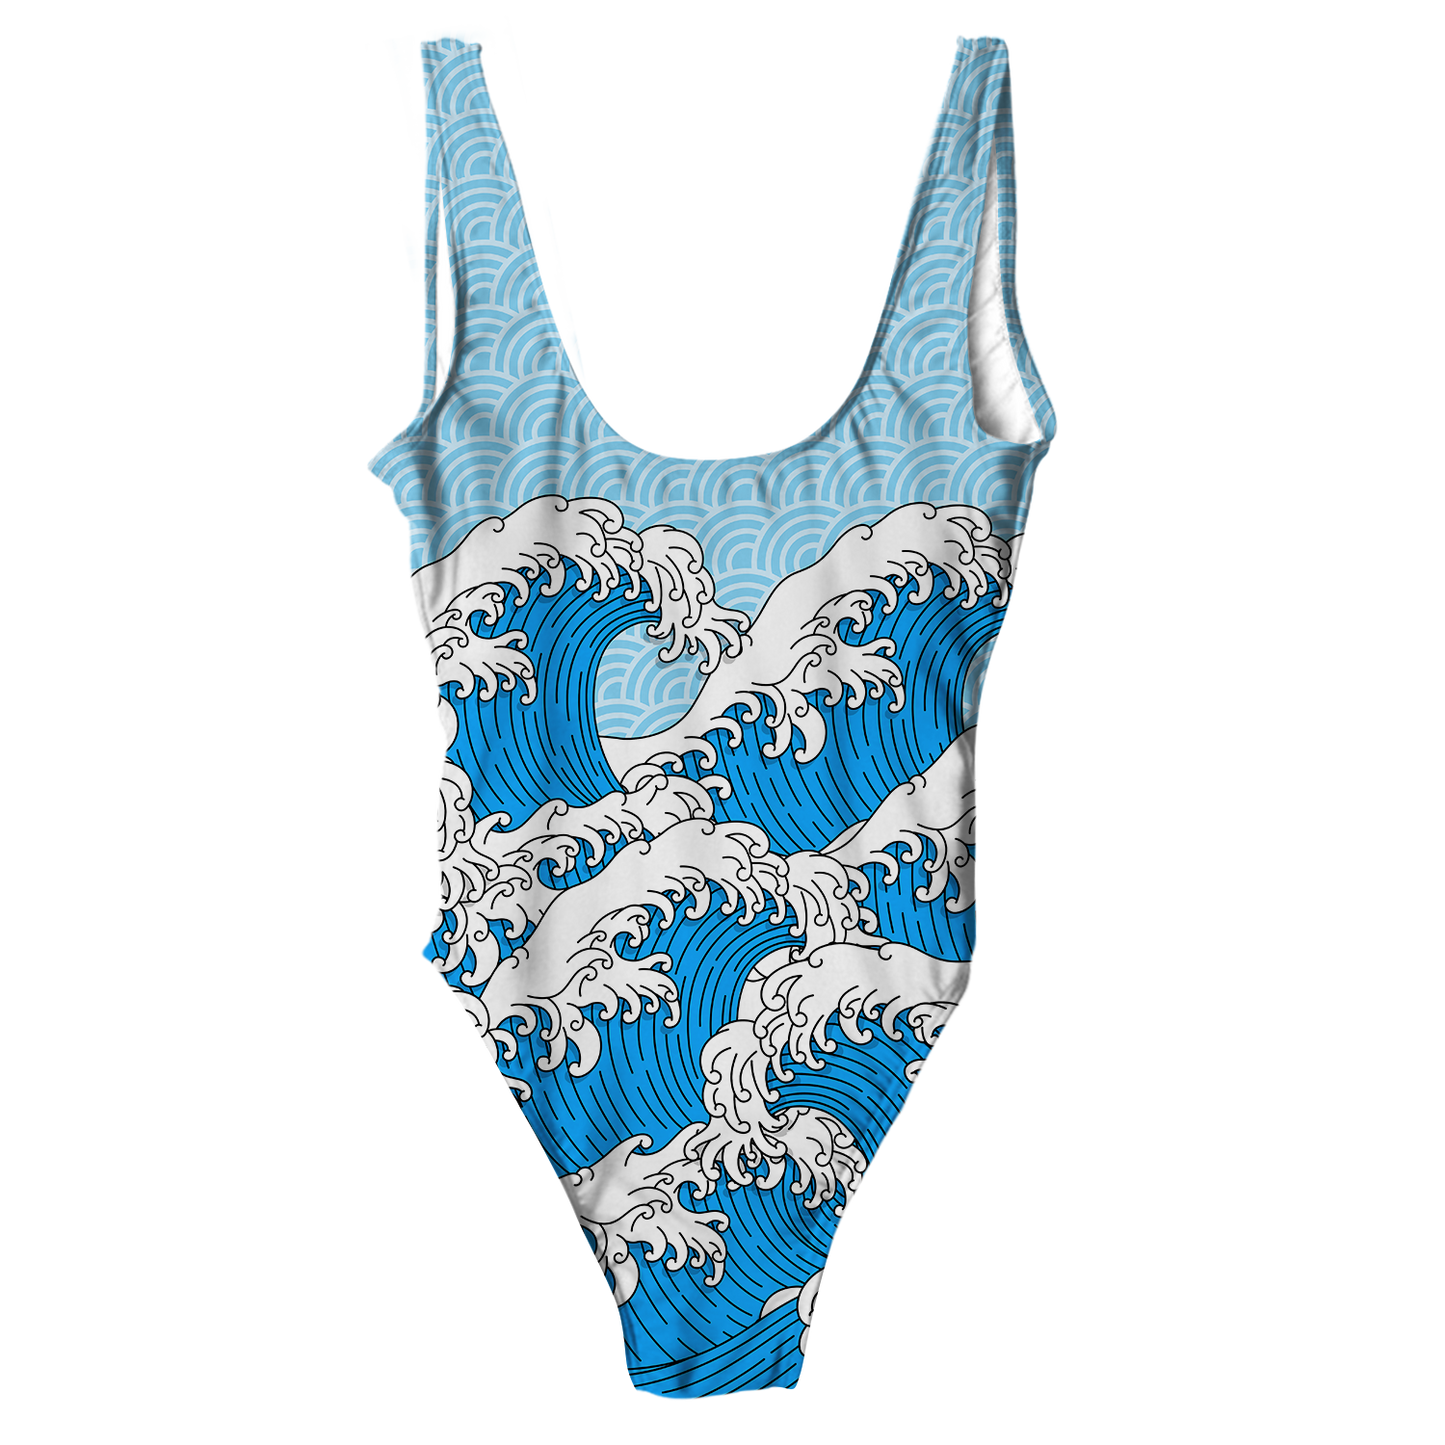 Retro Waves All Over Print One-Piece Swimsuit